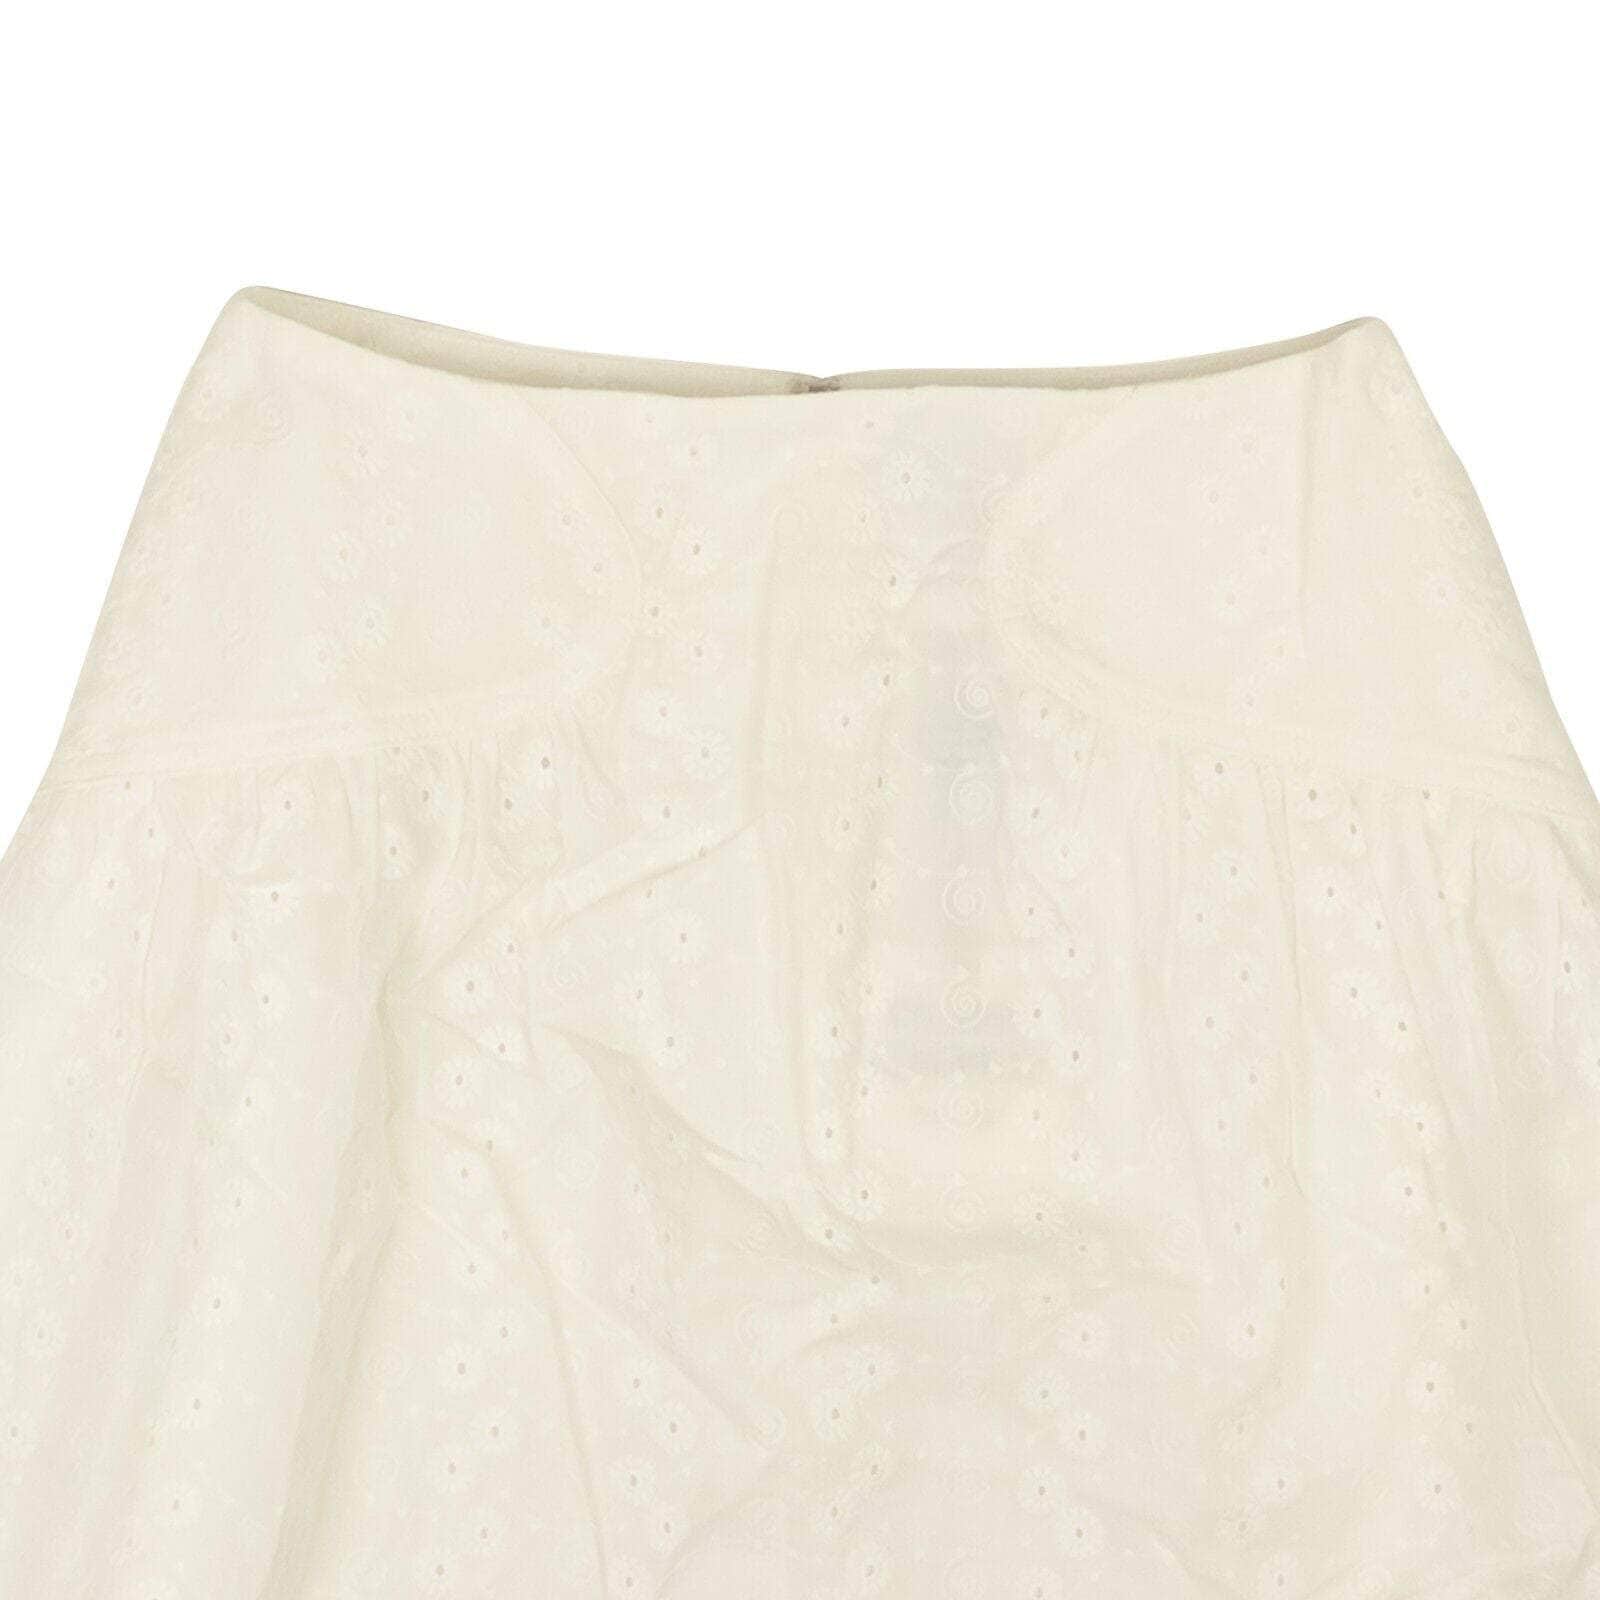 Opening Ceremony channelenable-all, chicmi, couponcollection, gender-womens, main-clothing, opening-ceremony, size-0, under-250, womens-flared-skirts Optic White Cotton Eyelet Mini Skirt